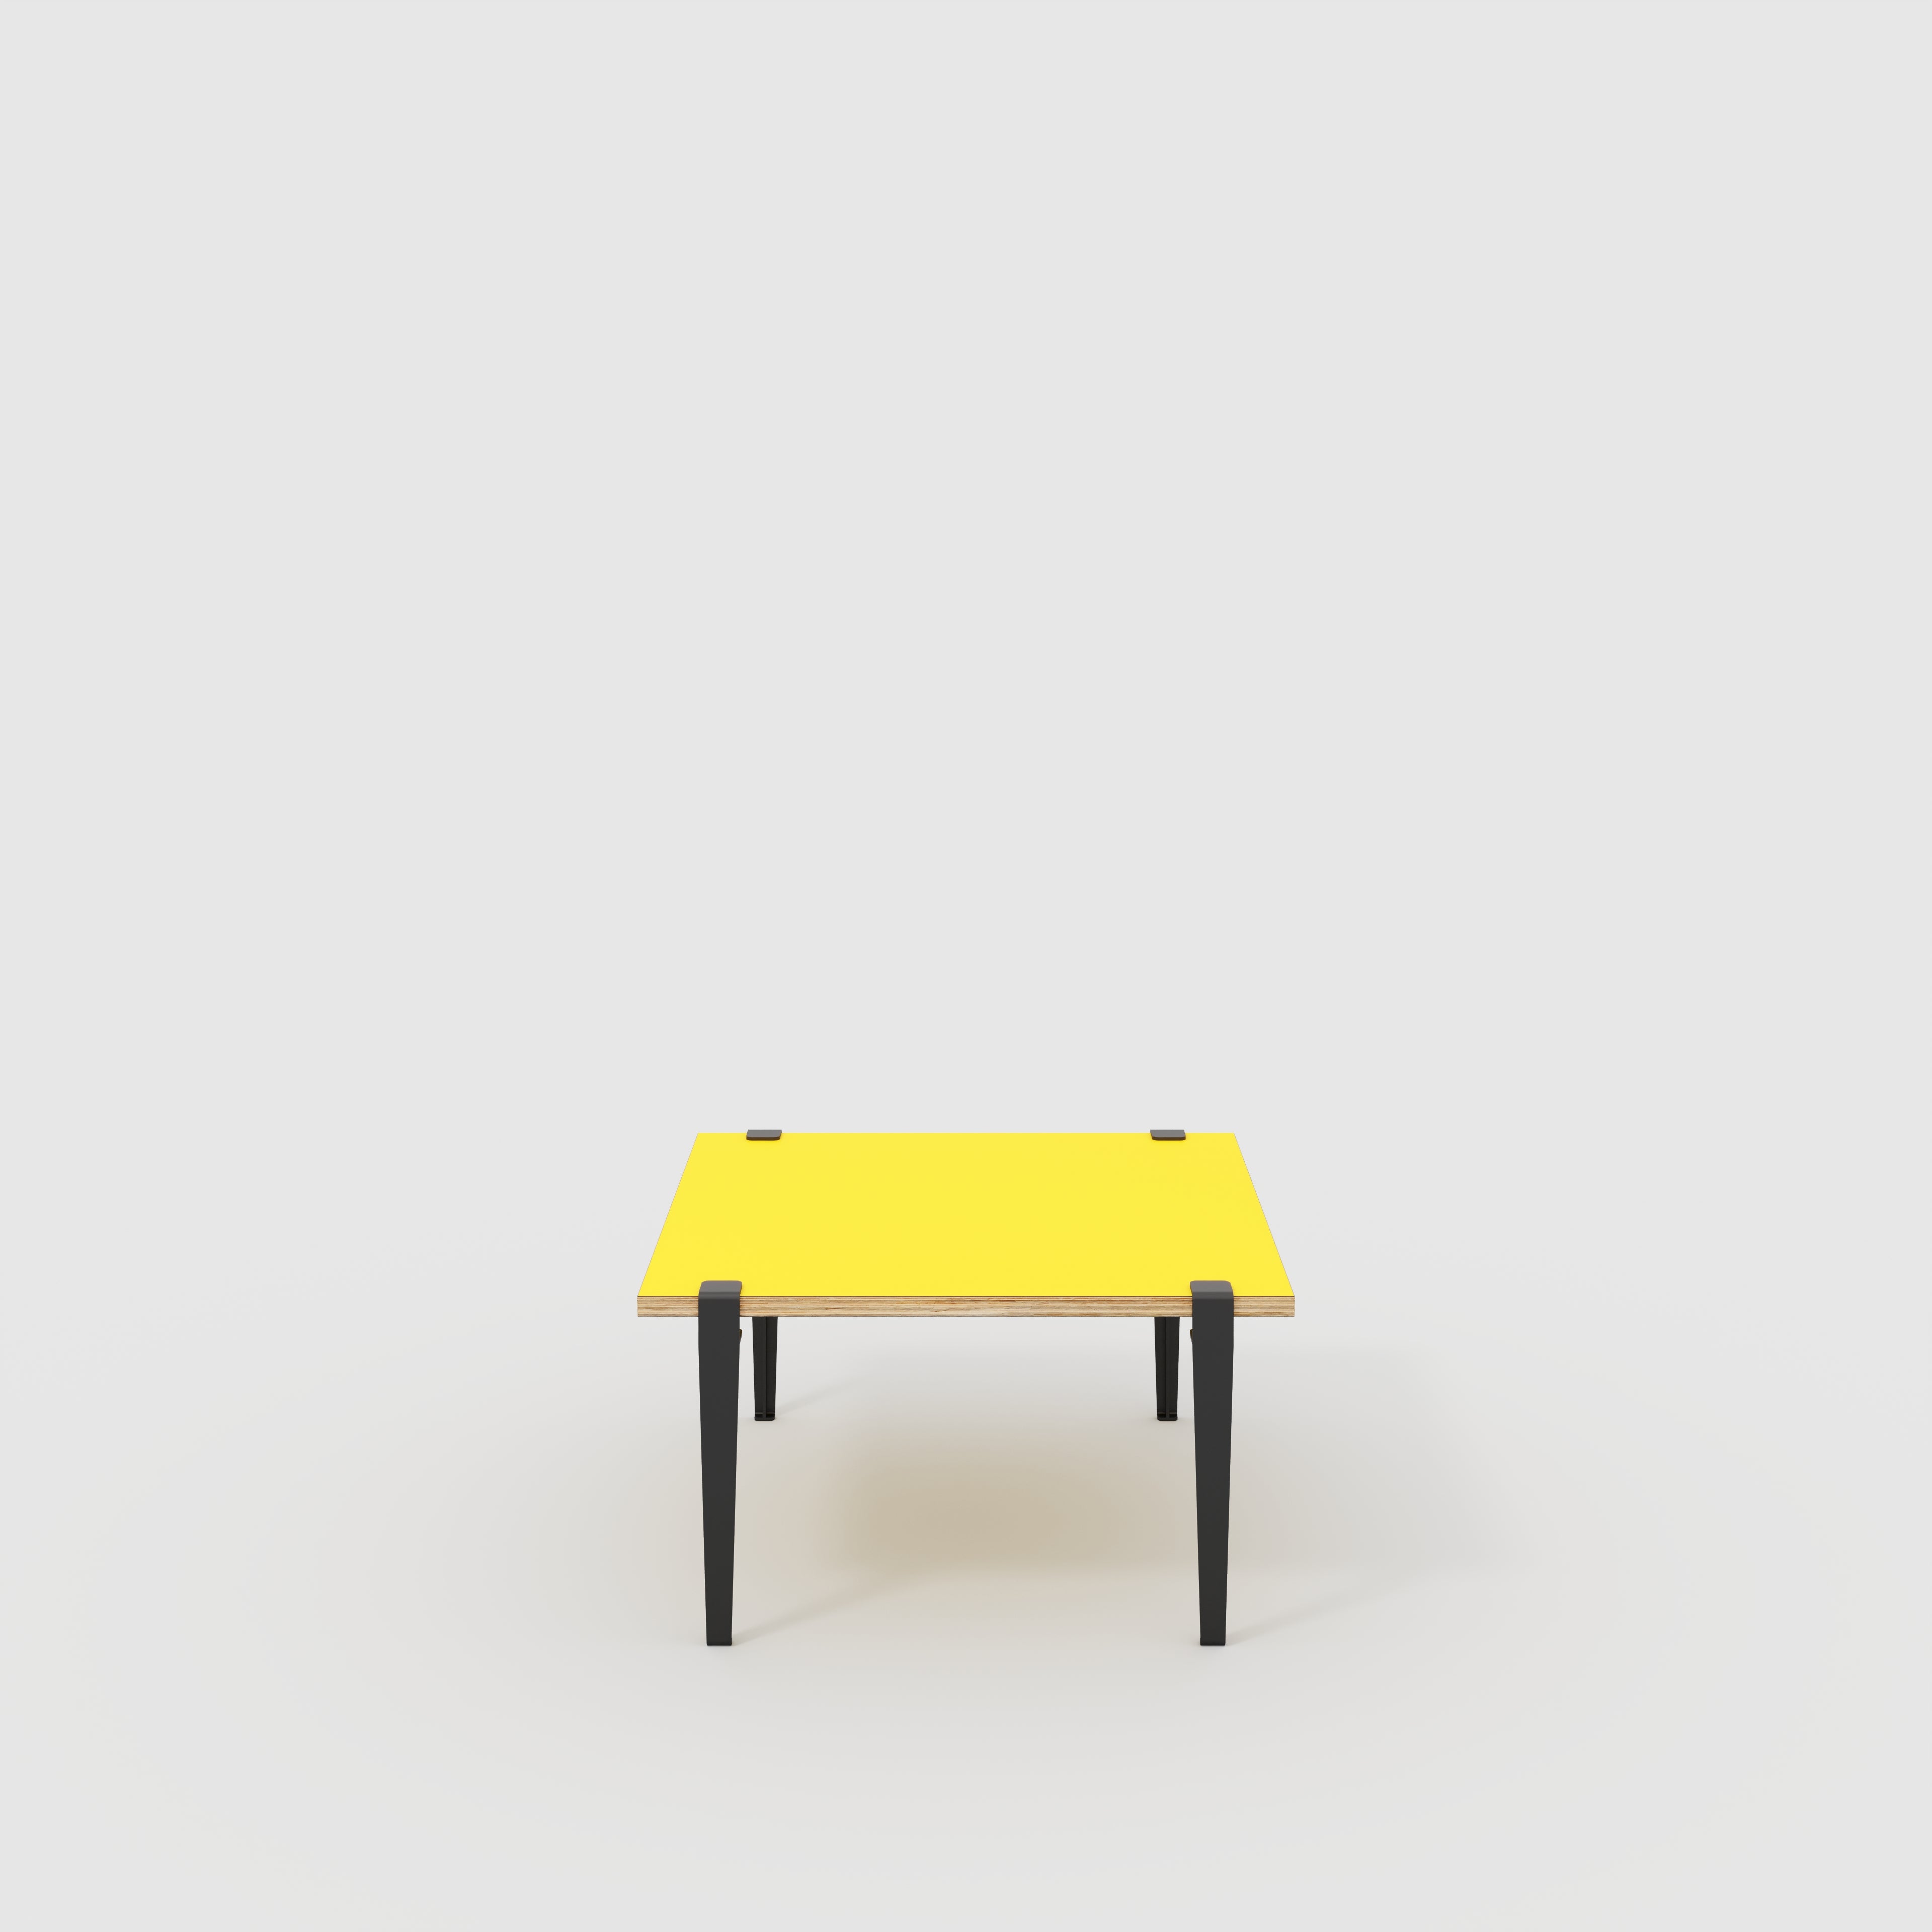 Coffee Table with Black Tiptoe Legs - Formica Chrome Yellow - 800(w) x 800(d) x 430(h)